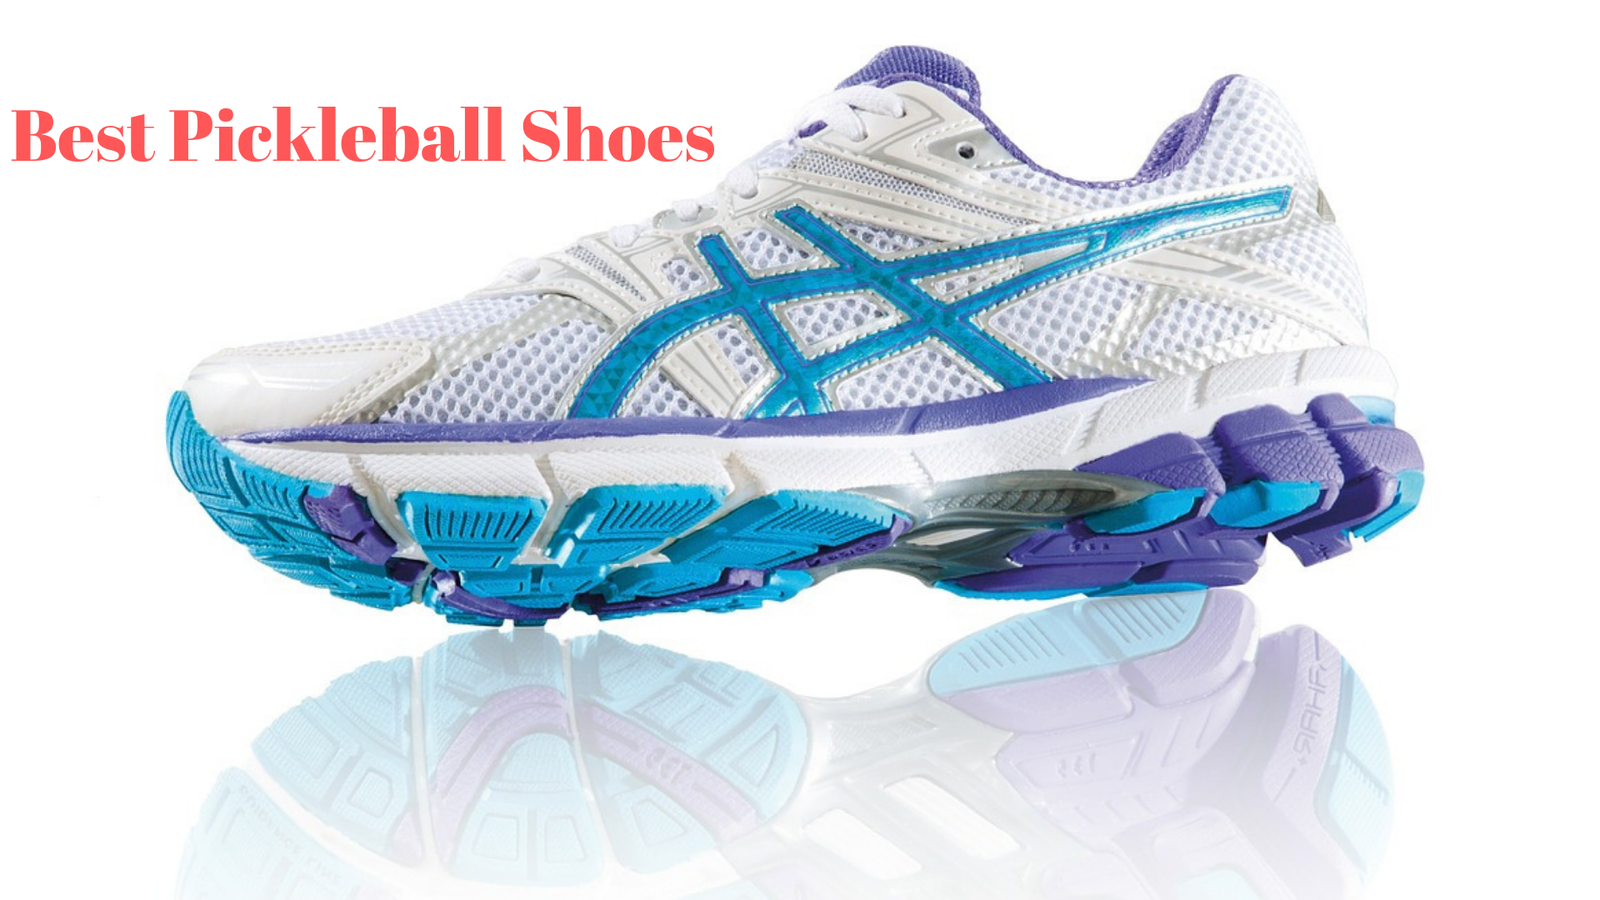 Best Pickleball Shoes for Men and Women 2021 Move With Confidence